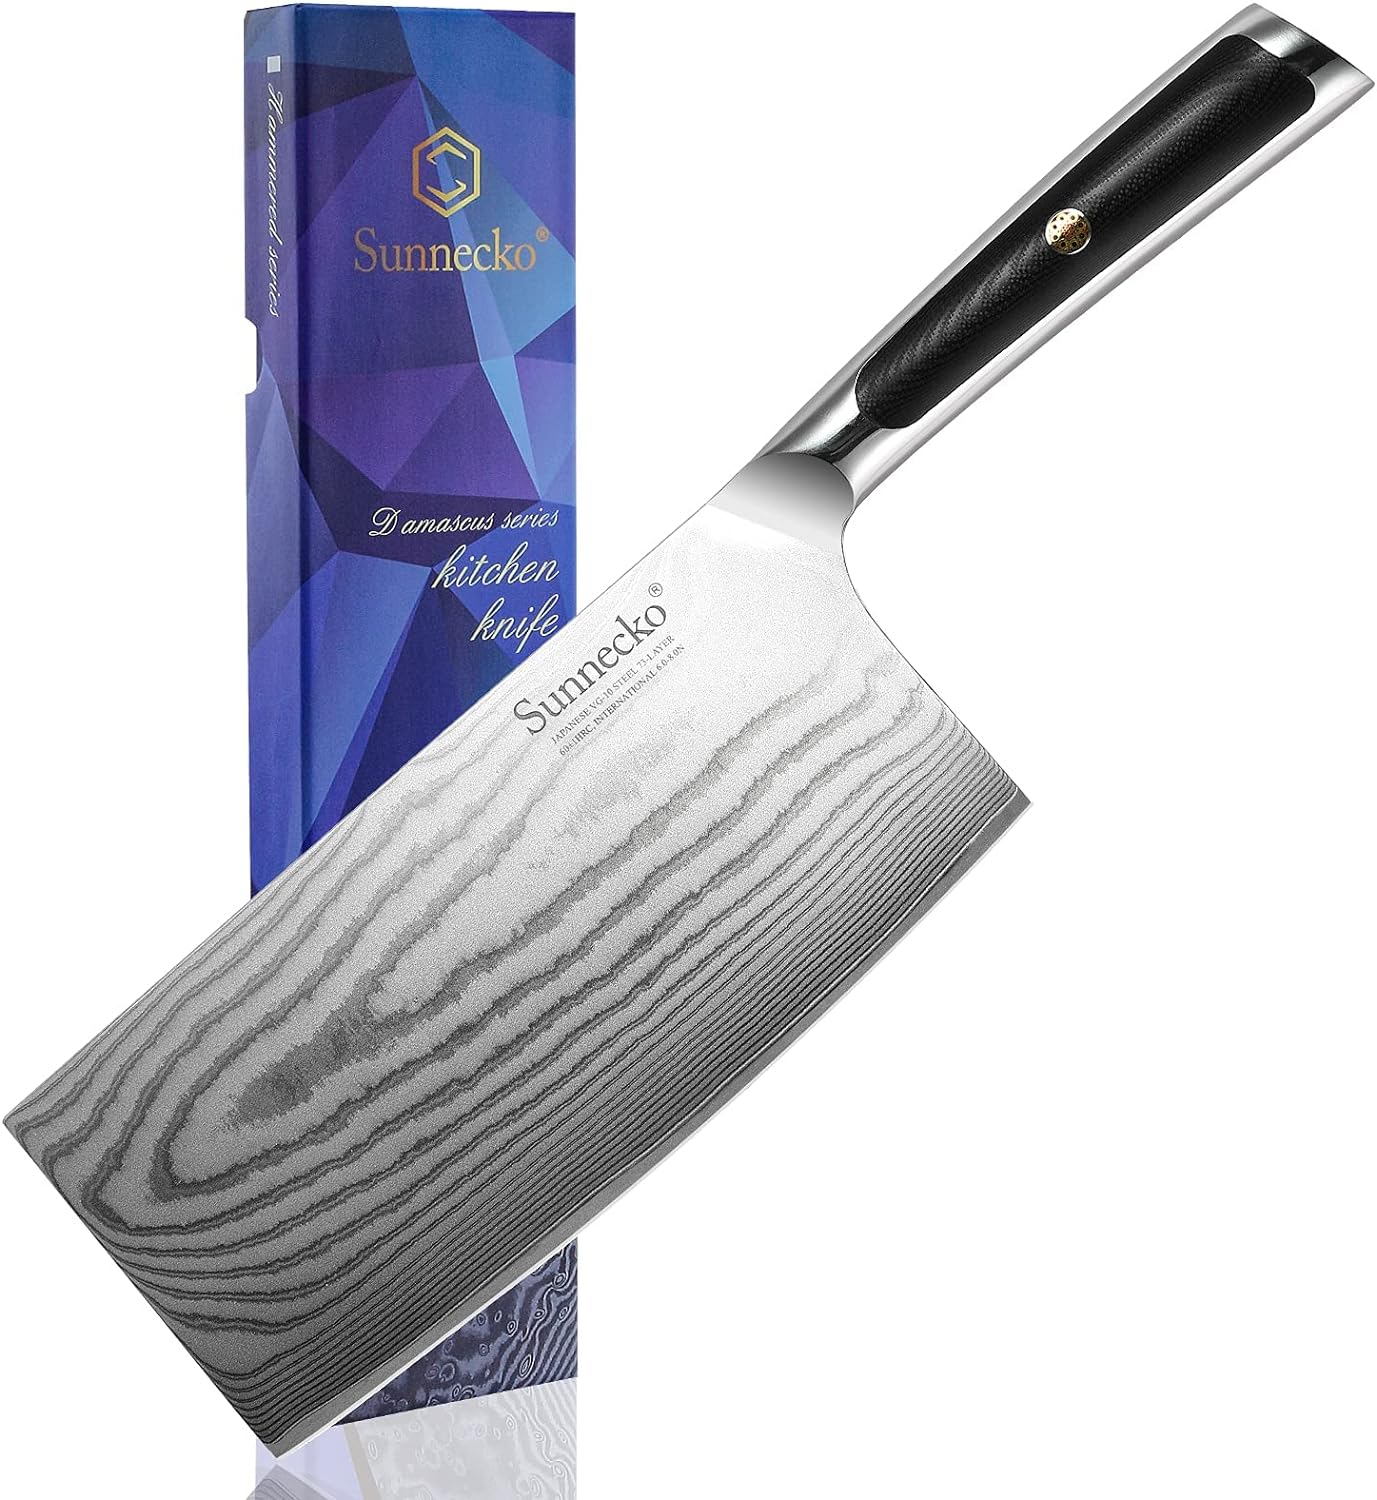 Sunnecko Cleaver Knife 7 inch, Chopping Knife with 73-layer Damascus Steel VG10 Blade Kitchen Knife, Chinese Chef Knife with G10 Handle Cutting Knife with Gift Box